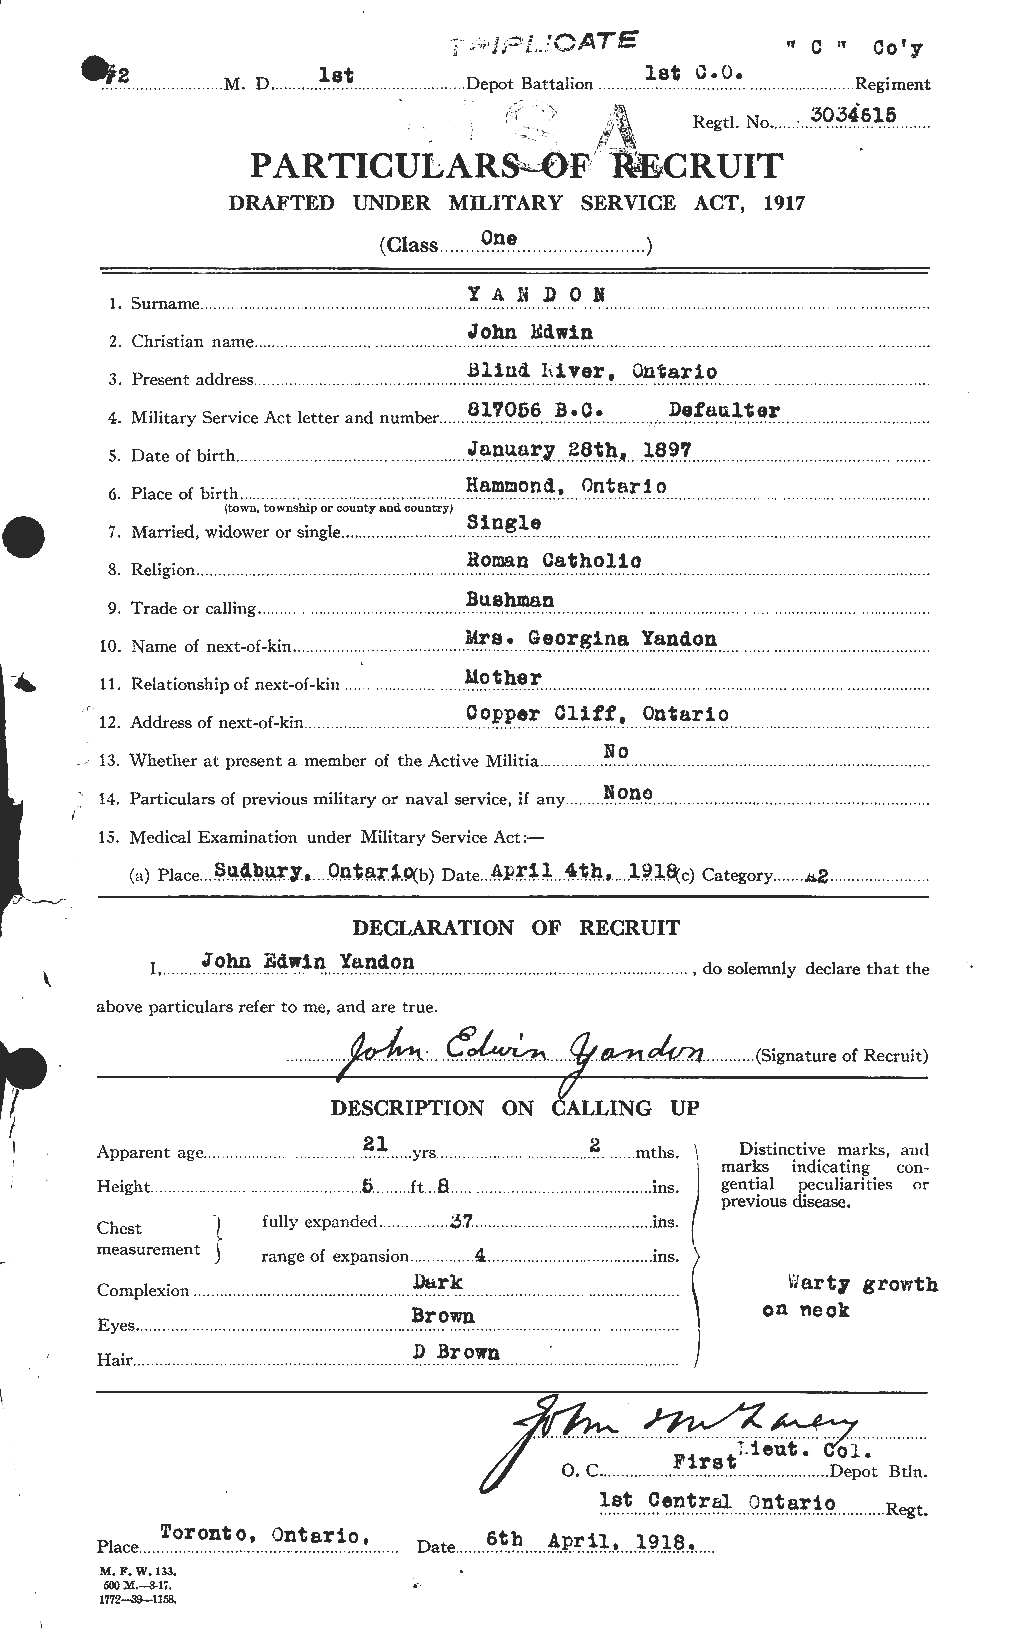 Personnel Records of the First World War - CEF 689482a